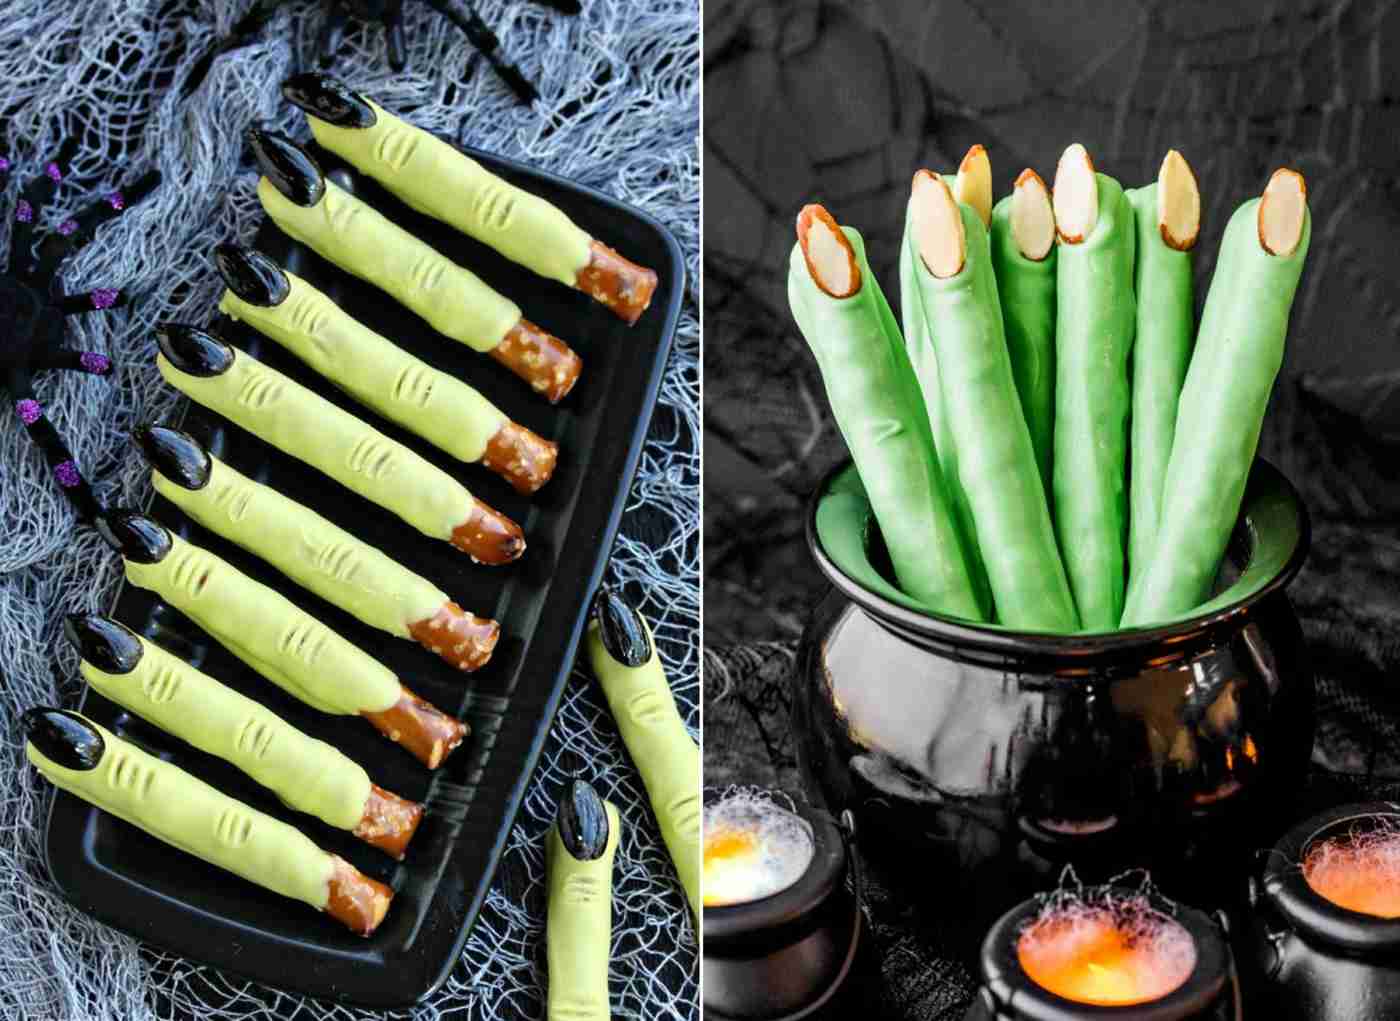 Hexen finger idea - Bake onion rods, overlay with green glaze and use almonds or olives as nails